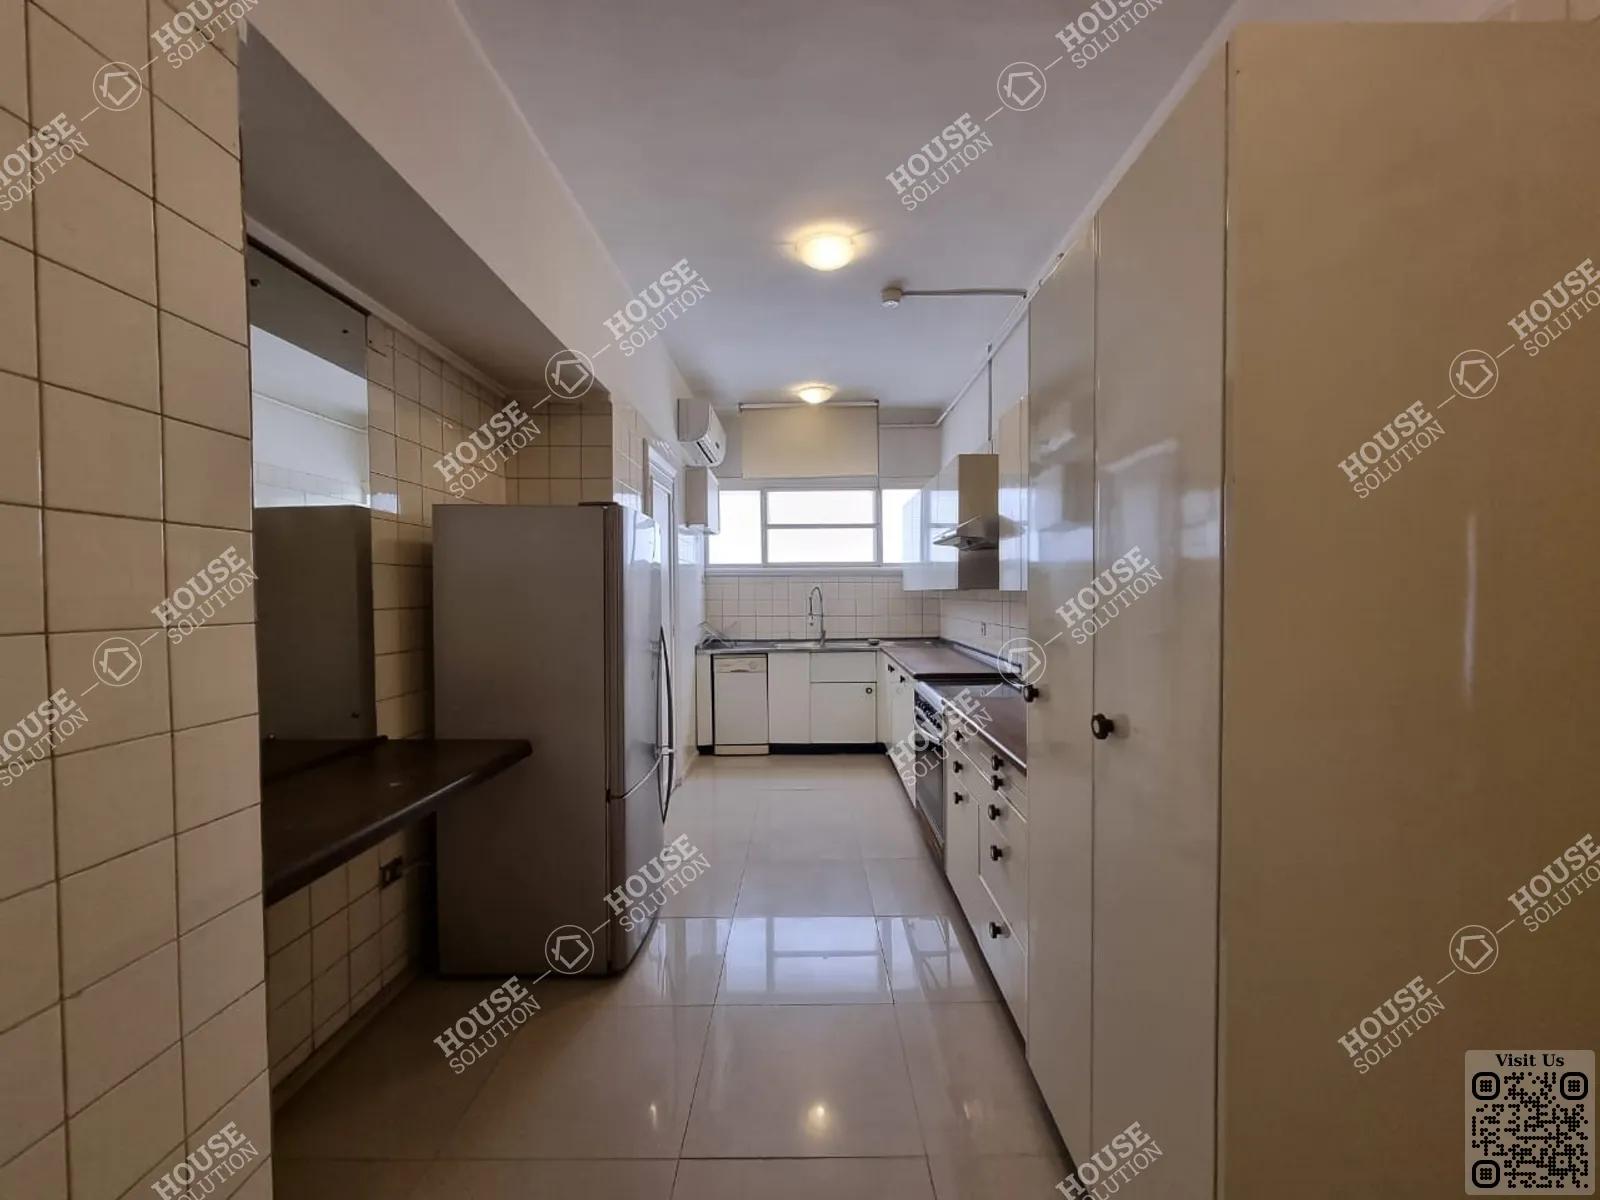 KITCHEN  @ Apartments For Rent In Maadi Maadi Sarayat Area: 220 m² consists of 3 Bedrooms 2 Bathrooms Modern furnished 5 stars #3494-2